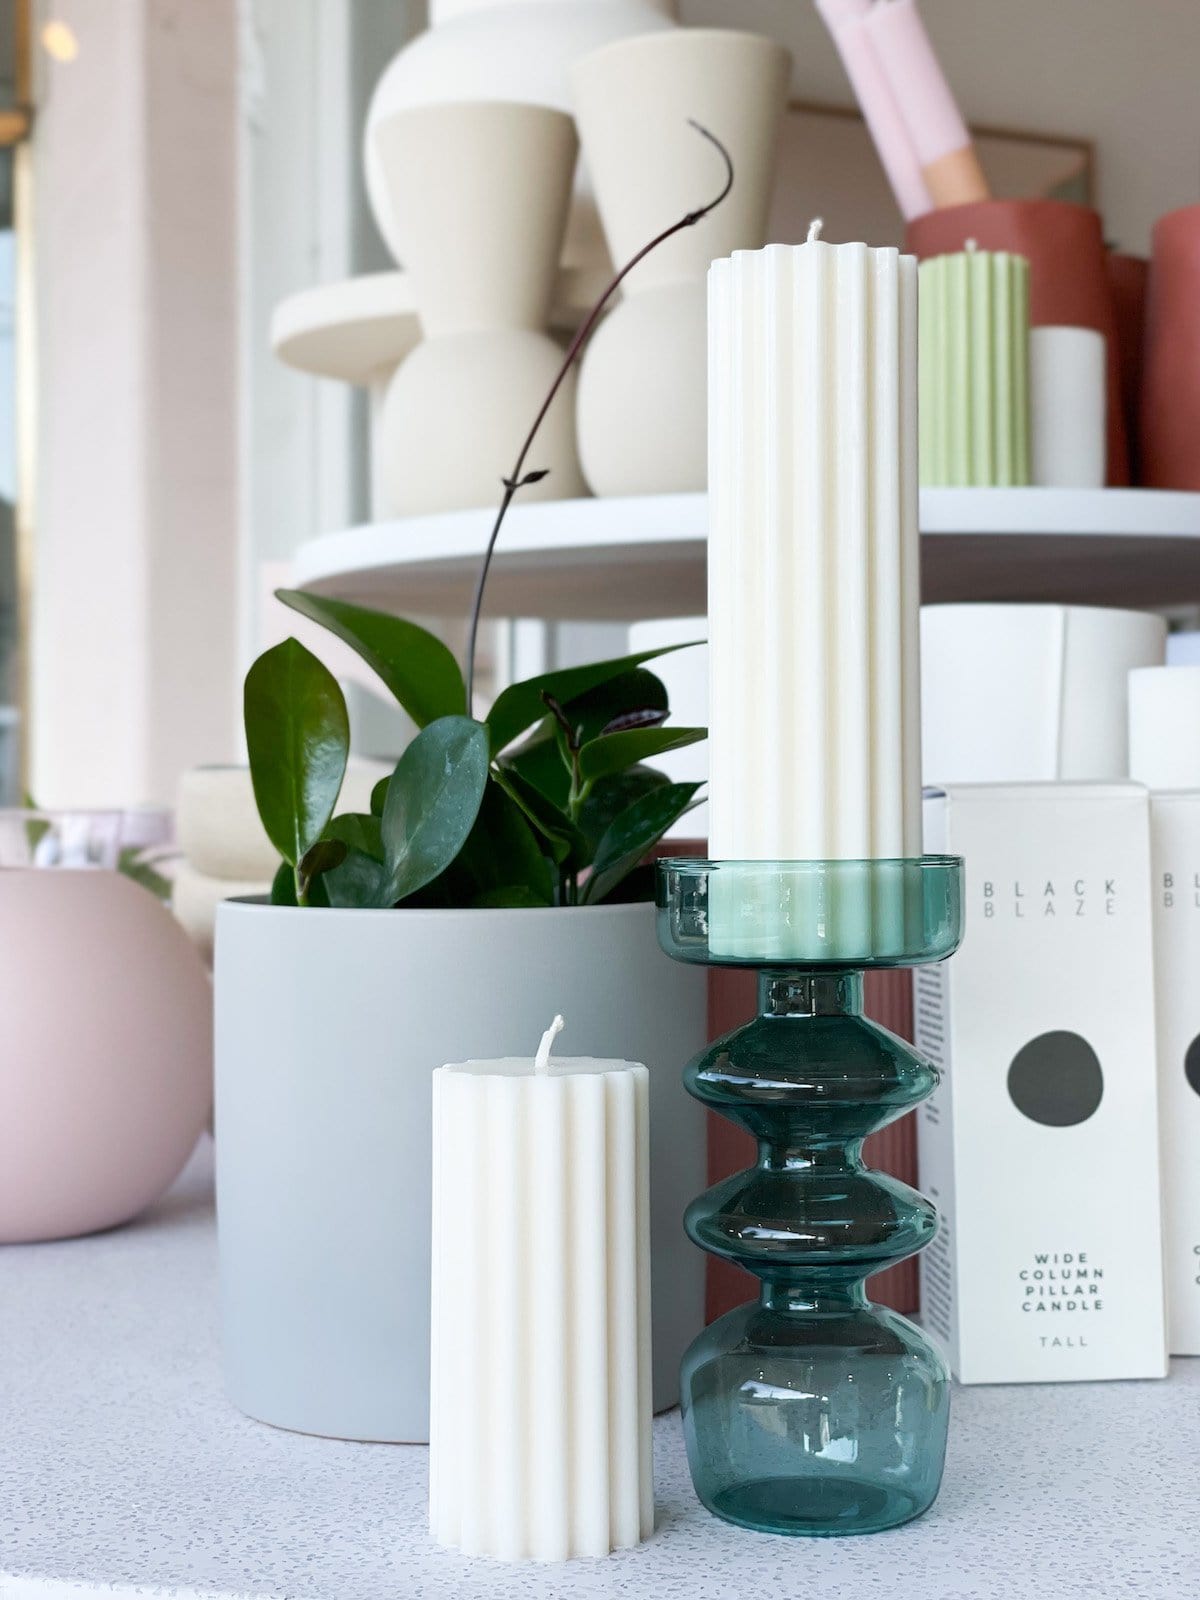 Make Scents of It Fluted Candle, Tall, White - Norsu Interiors (7089194041532)